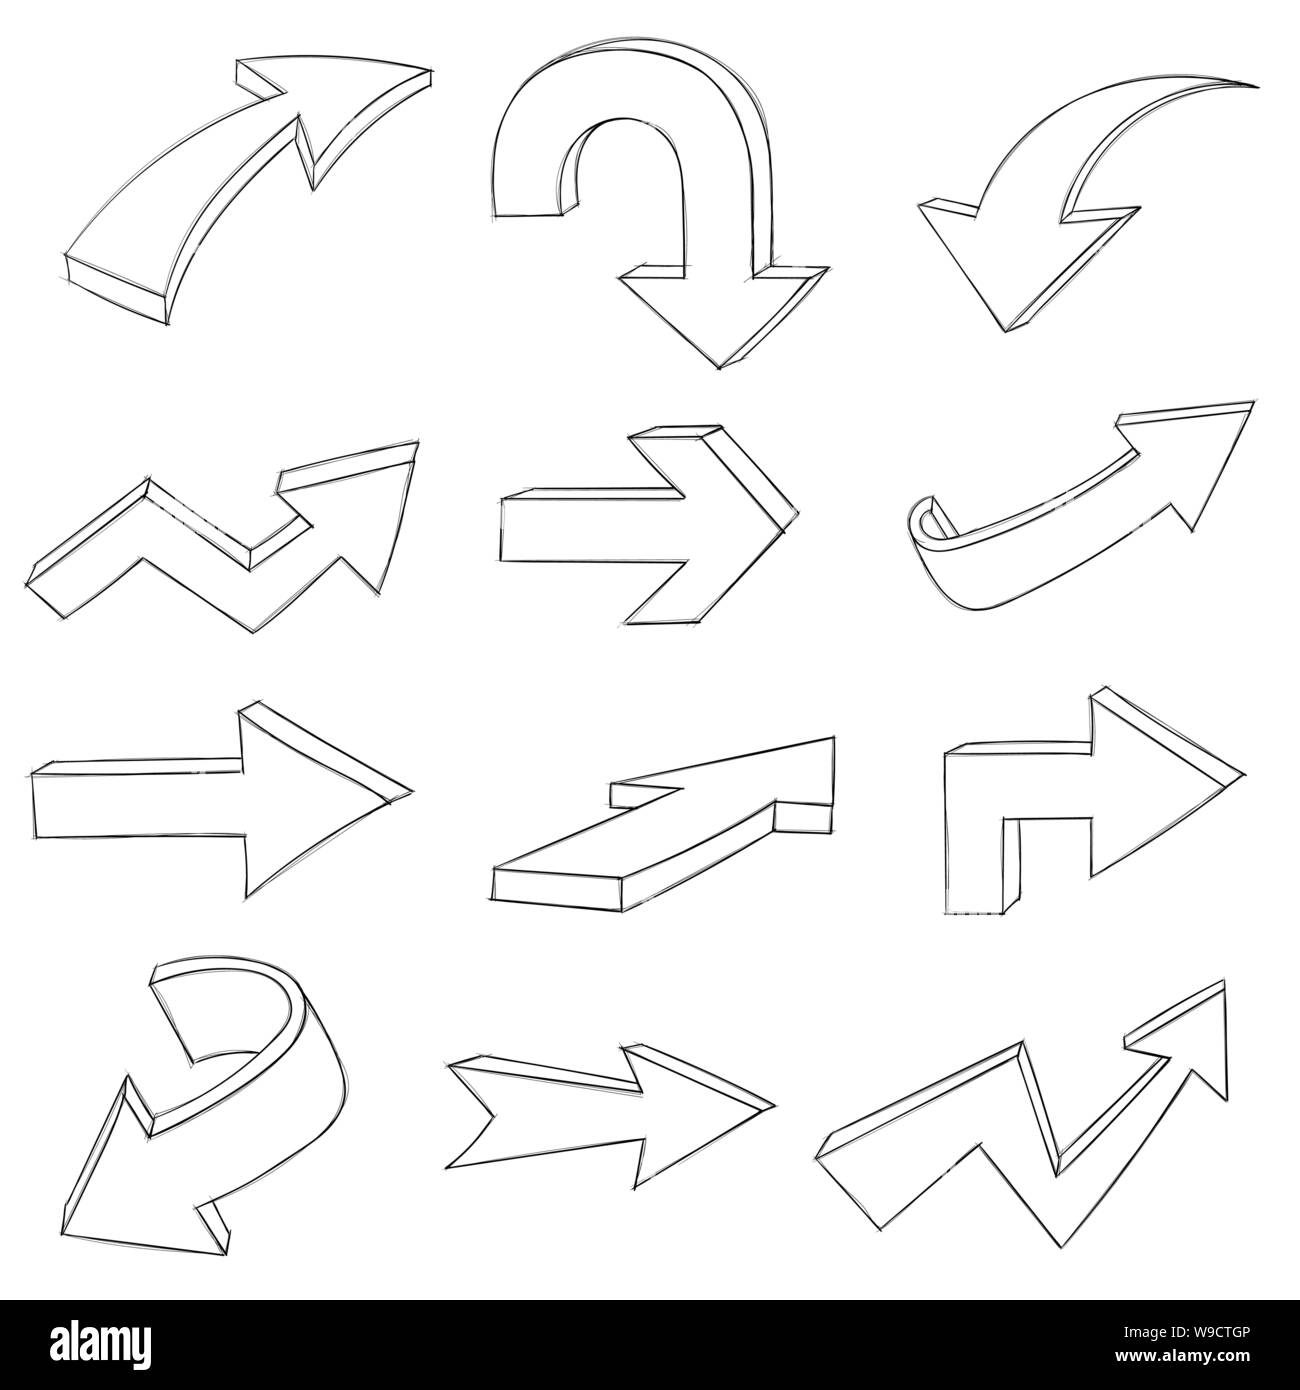 Arrows. Collection of hand drawn arrow signs Stock Vector